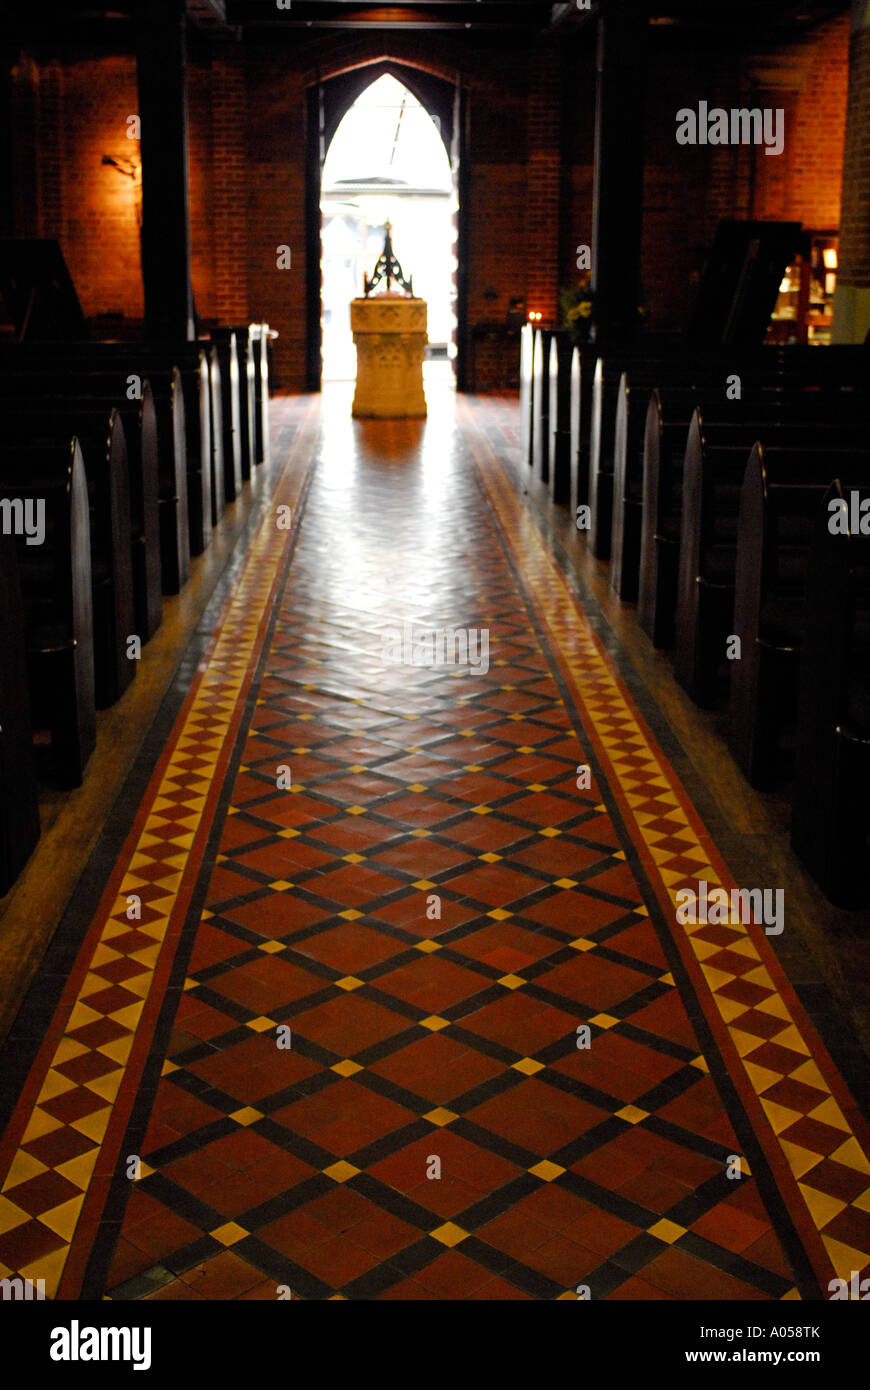 Tiled aisle of Saint George's Anglican Cathedral, Perth, Western Australia Stock Photo